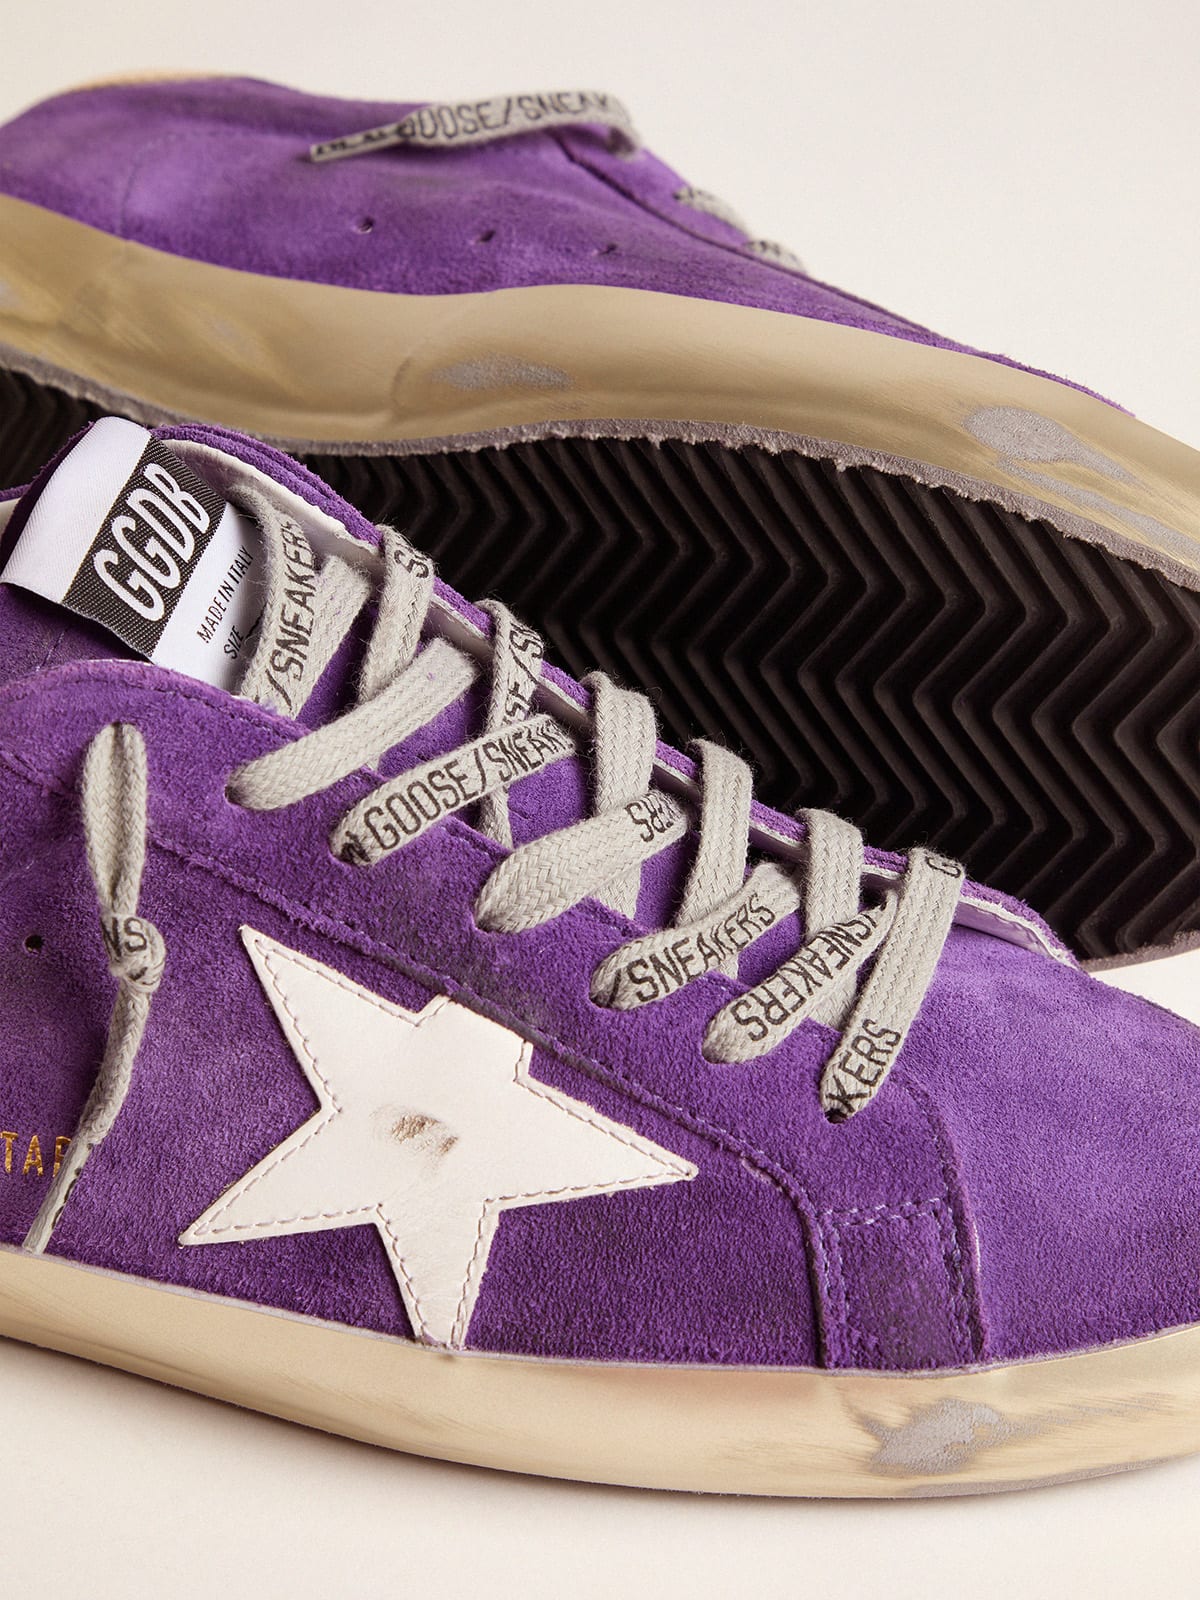 The Italian made Purple Denim is limited edition with black suede